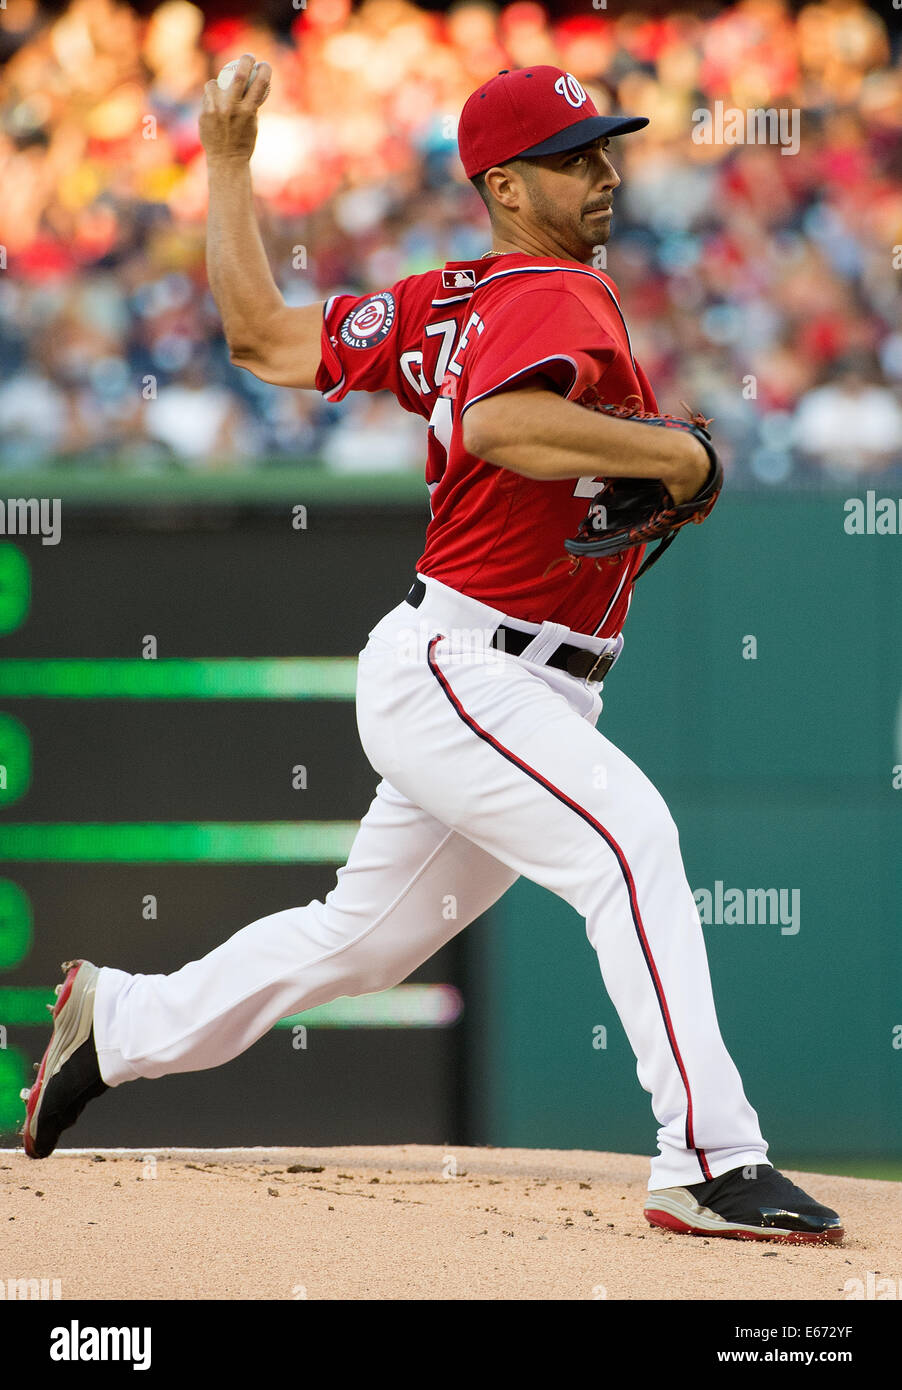 Washington Nationals starting pitcher Gio Gonzalez (47) delivers a pitch against the Pittsburgh Pirates during the first inning of their game at Nationals Park in Washington, D.C, Saturday, August 16, 2014. Credit:  Harry Walker/Alamy Live News Stock Photo